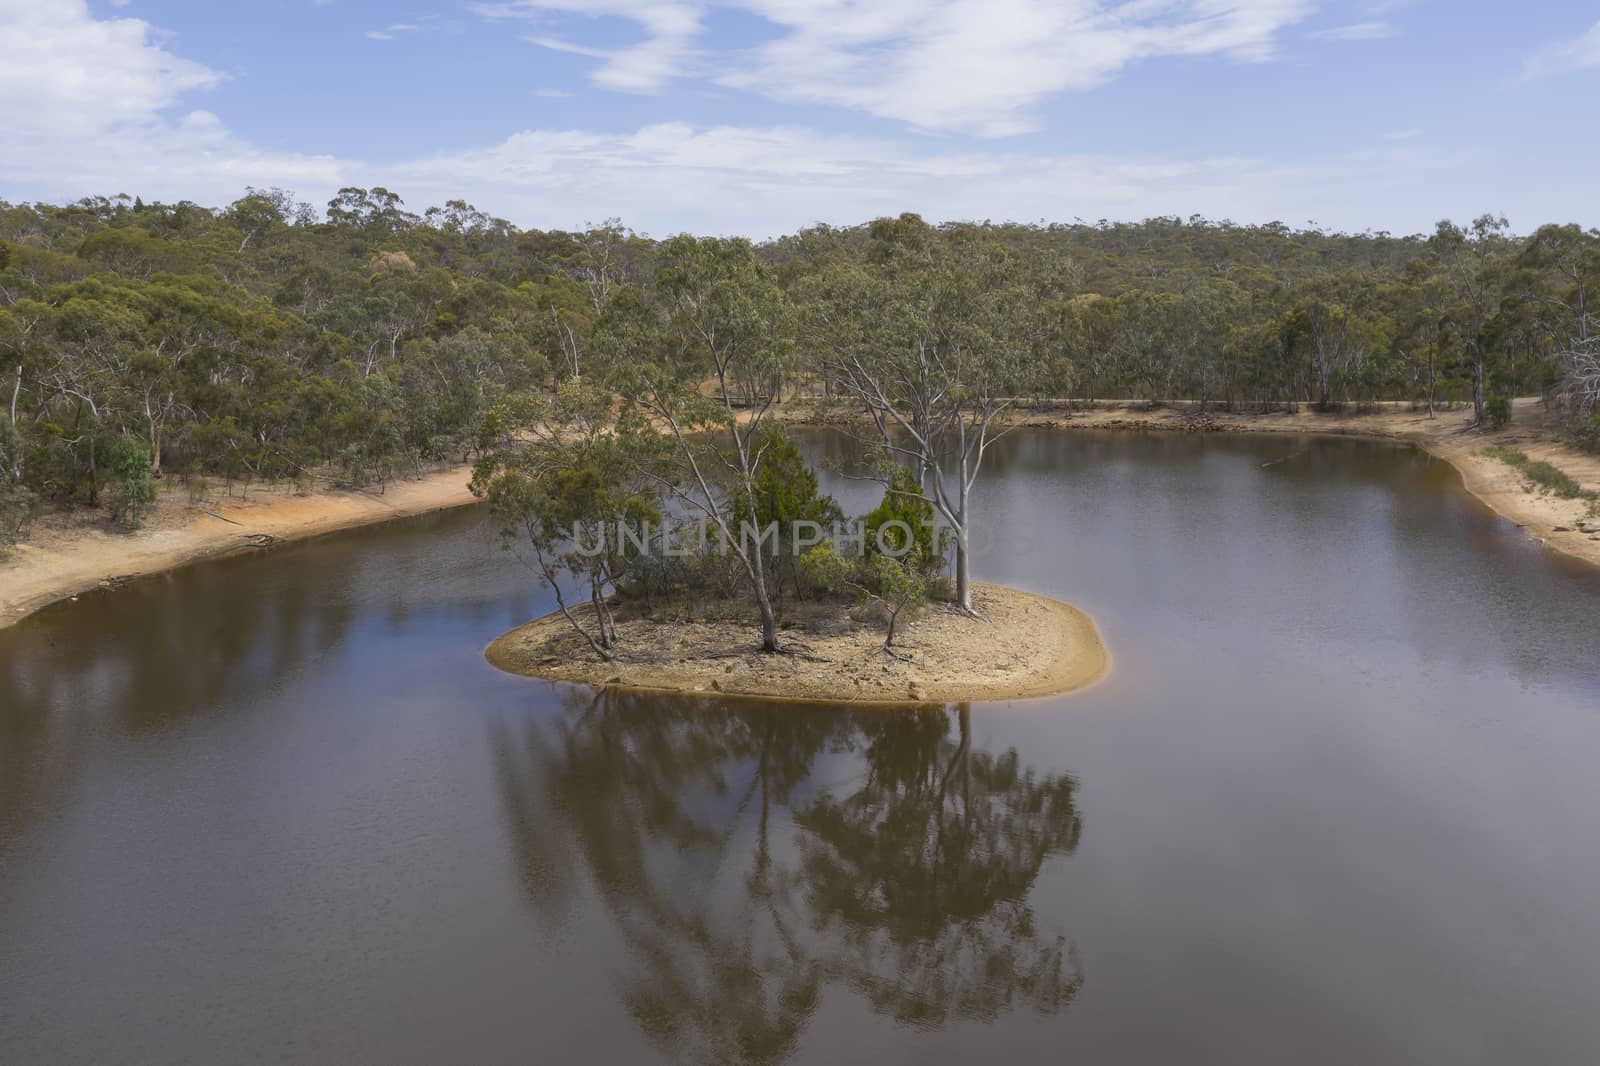 Aerial view of a drought affected water reservoir in regional Australia by WittkePhotos